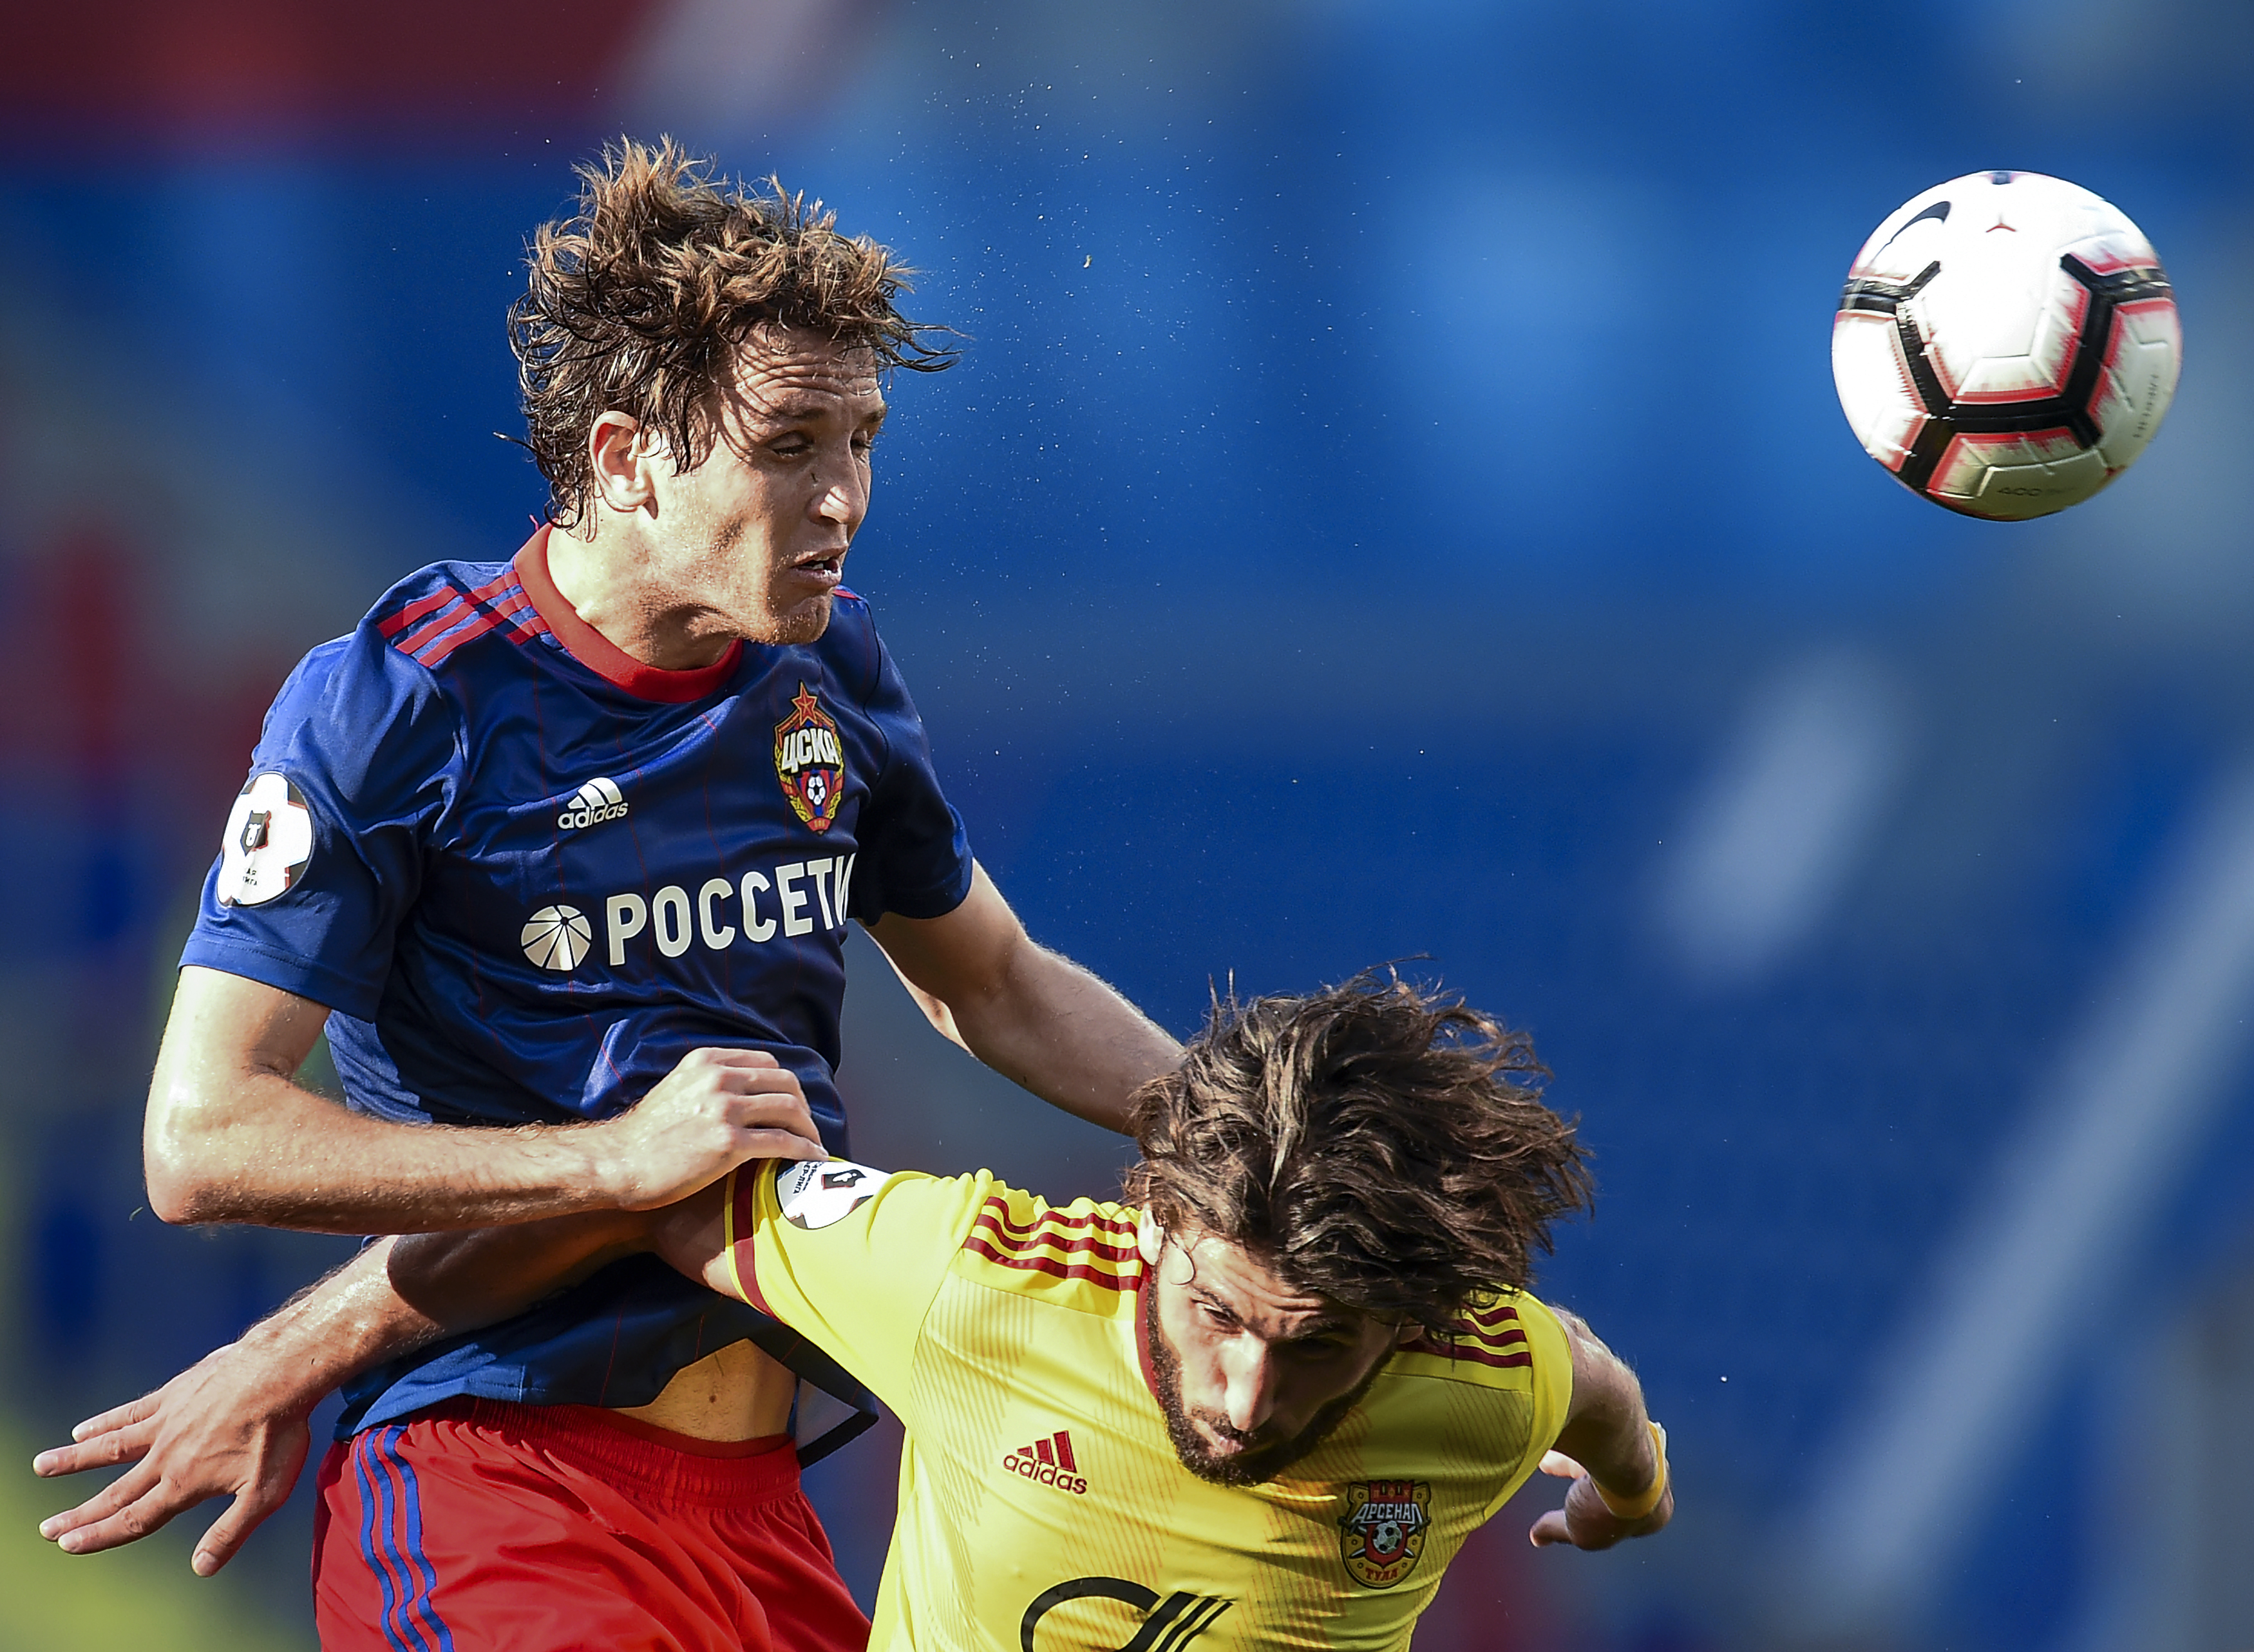 MOSCOW, RUSSIA - AUGUST 18: Mario Fernandes (L) of PFC CSKA Moscow is challenged by Anri Khagush of FC Arsenal Tula during the Russian Premier League match between PFC CSKA Moscow and FC Arsenal Tula at the VEB Arena Stadium on August 18, 2018 in Moscow, Russia. (Photo by Epsilon/Getty Images)